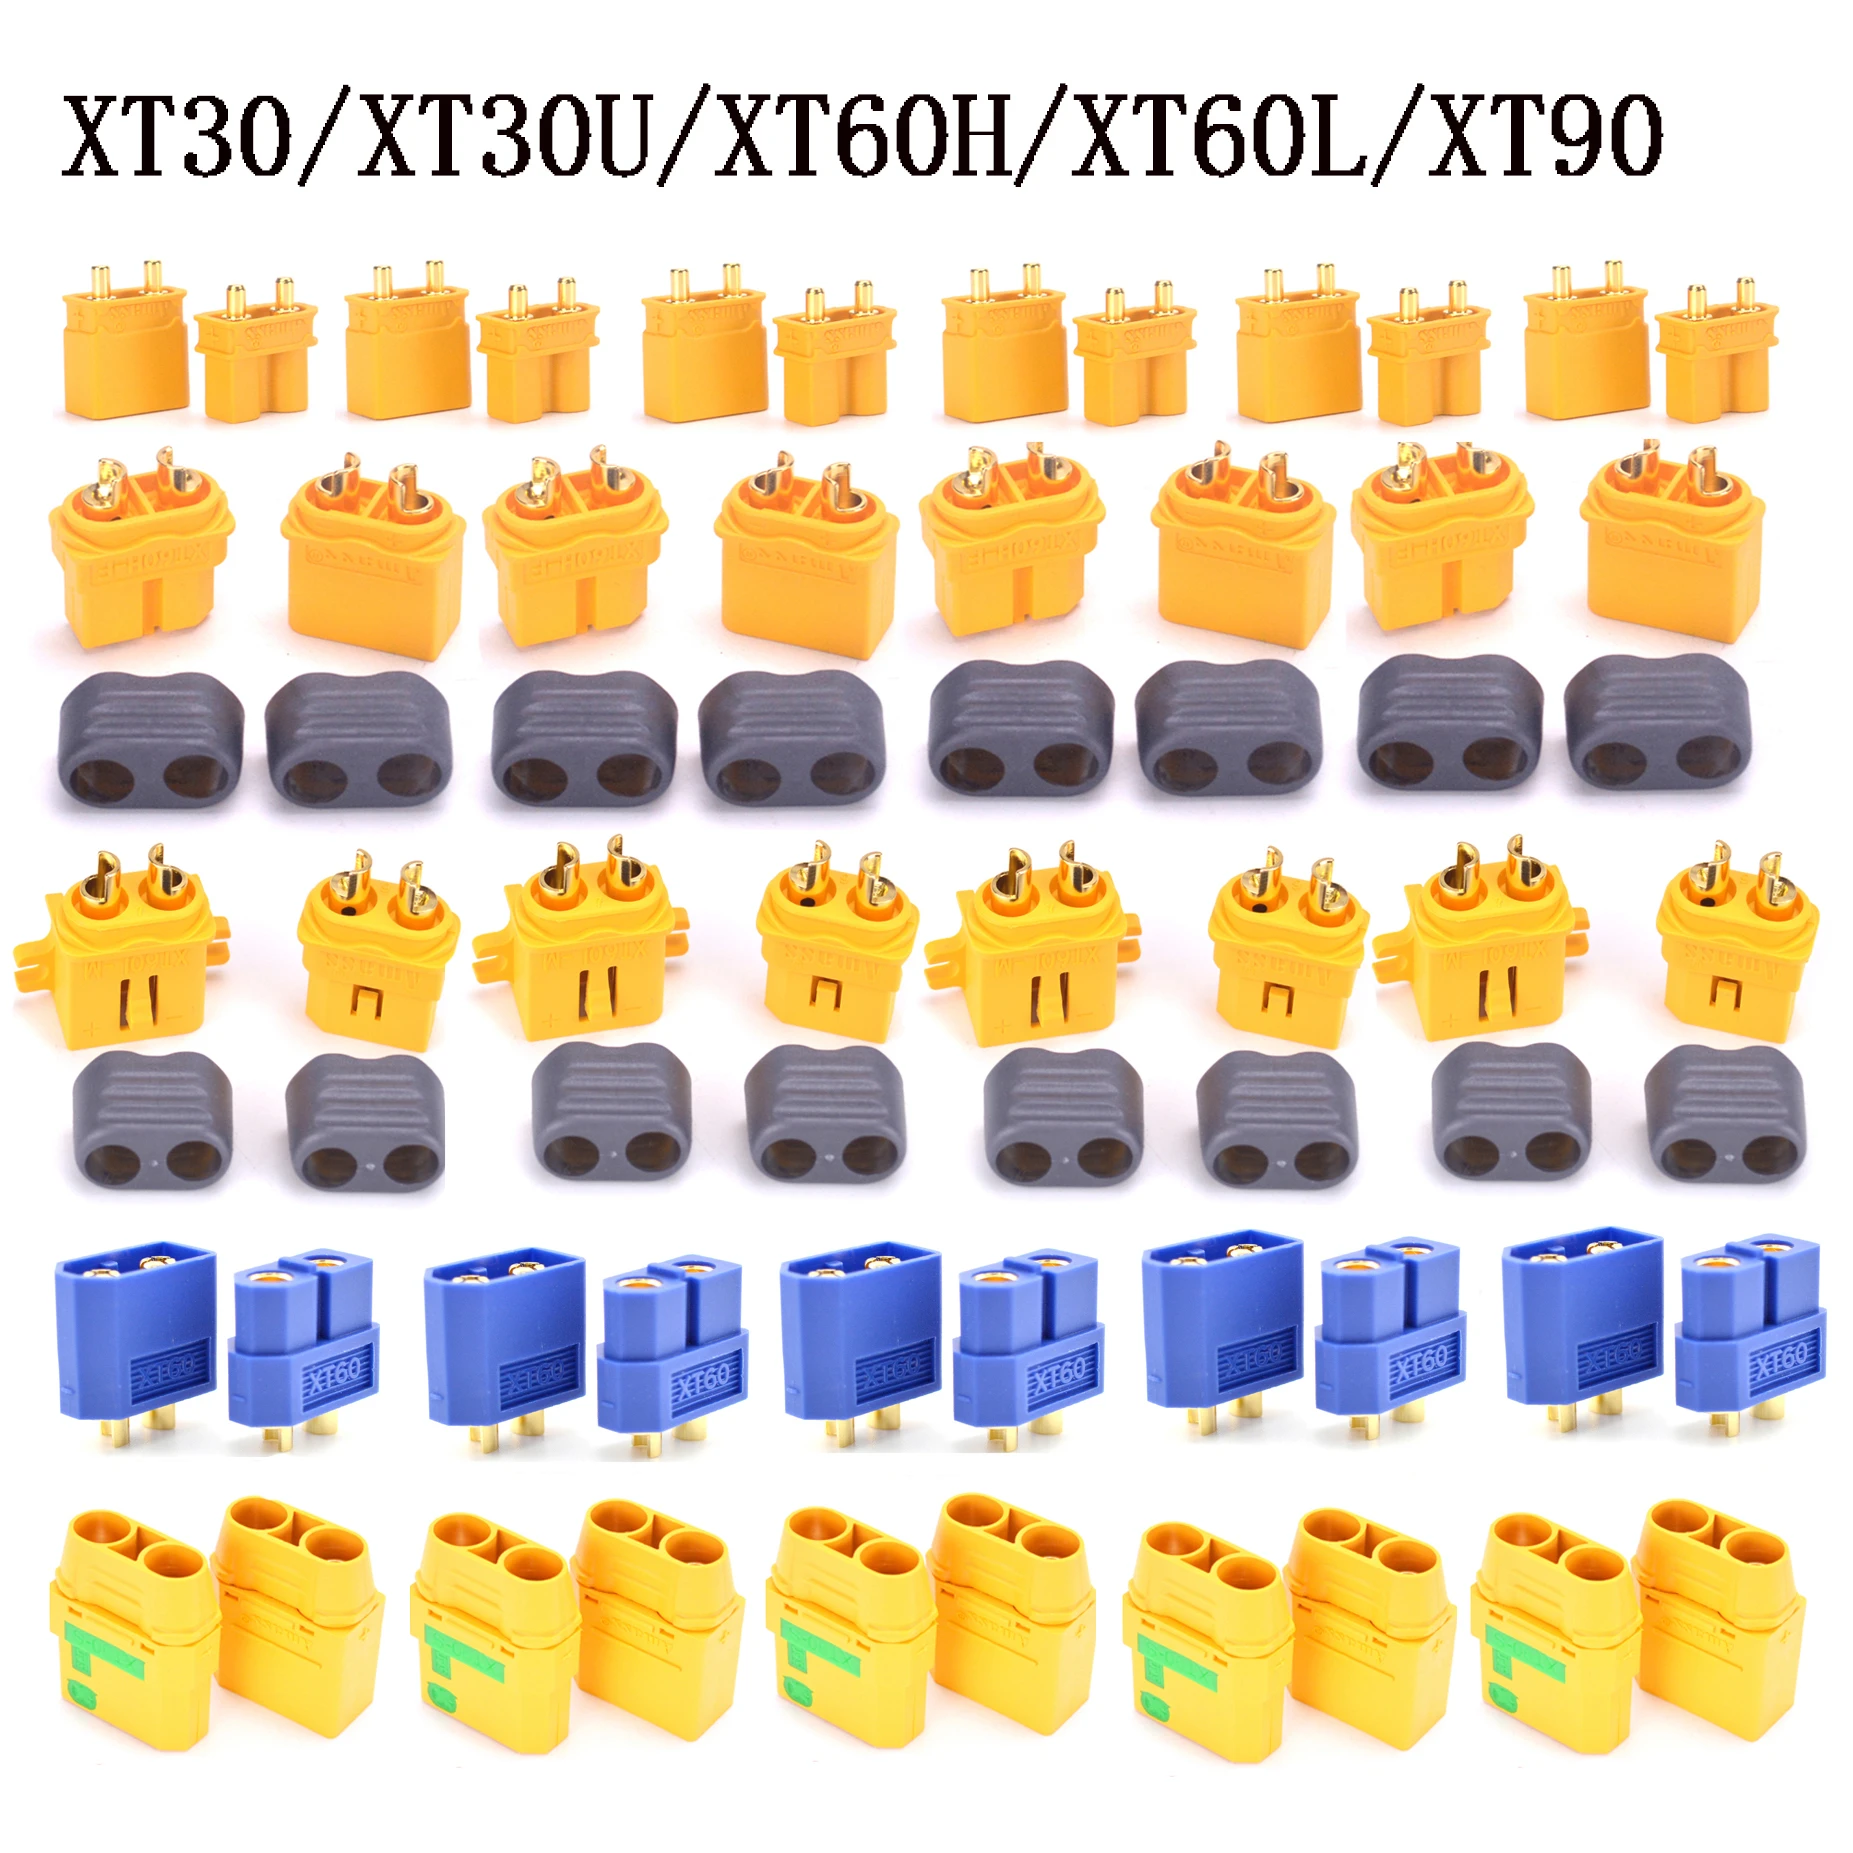 20pcs(10 pairs) High Quality XT30 XT30U XT60 XT60H XT60L XT60PW  XT90 XT90S Connector plug for Battery quadcopter multicopter